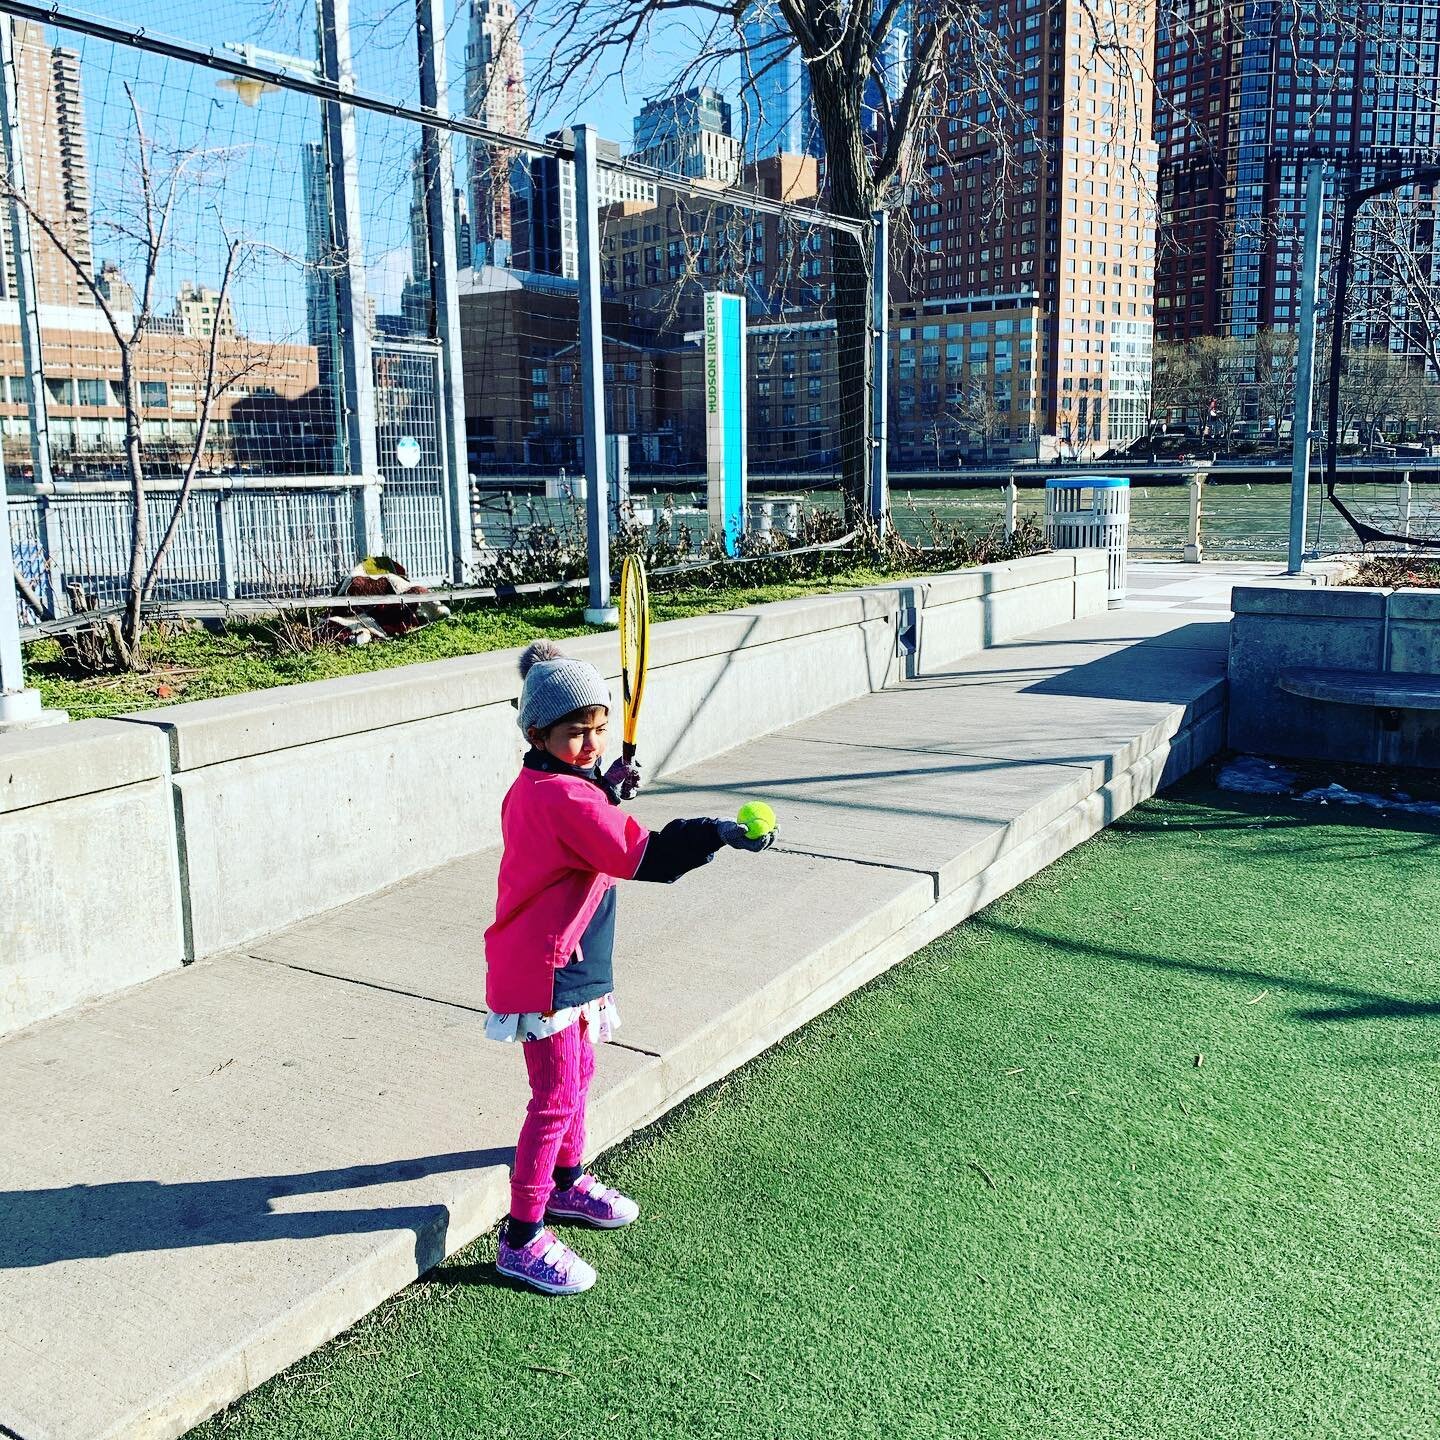 Can you imagine playing in a spot like this? #tribeca #tribecanyc #downtownkids #afterschoolactivitiesforkids